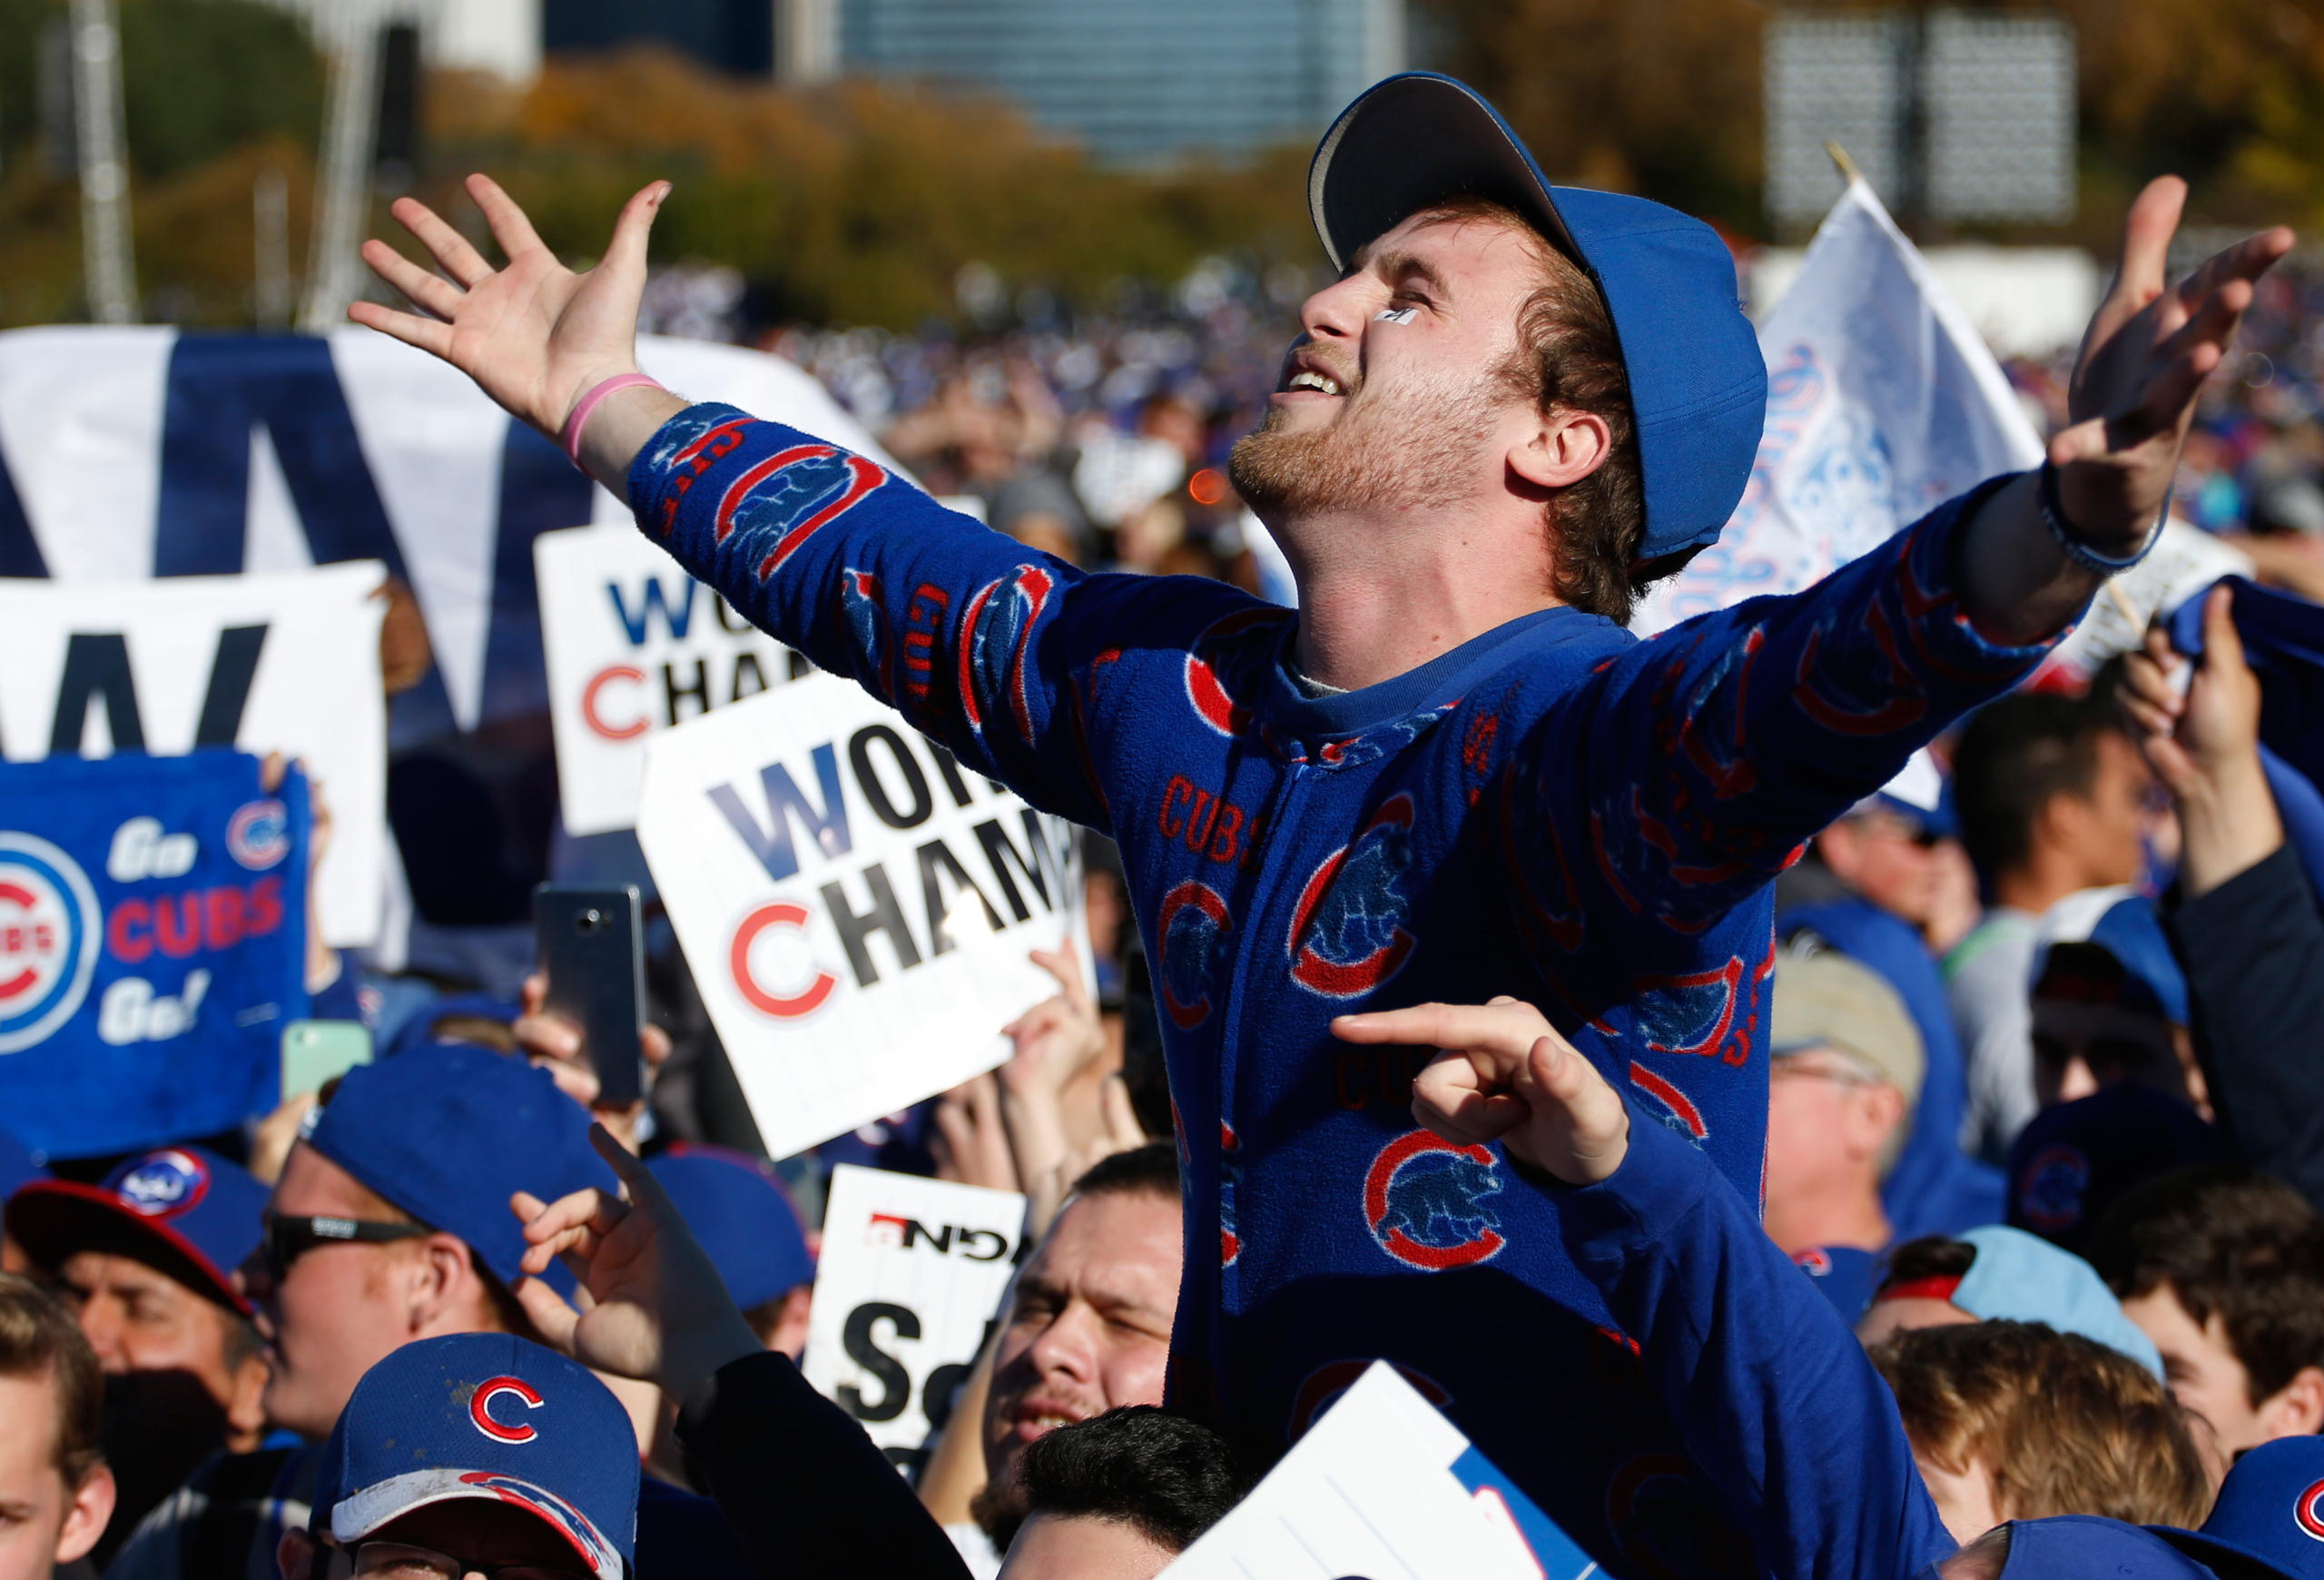 Chicago Cubs fans celebrate before a rally in Grant Park honoring the World Series baseball champions in Chicago on Nov. 4, 2016. (Nam Y. Huh—AP)